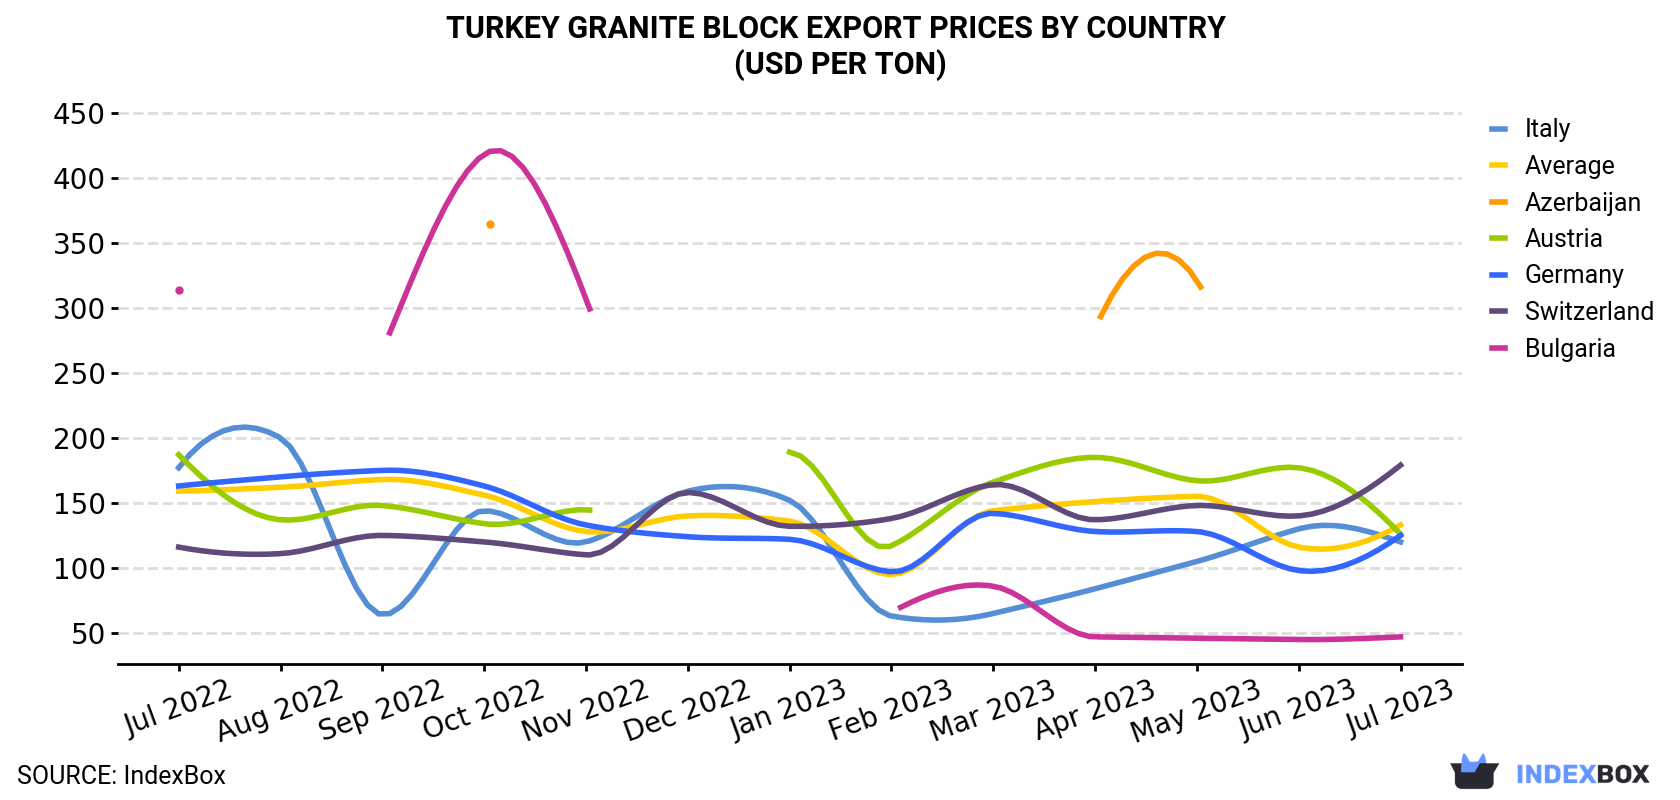 Turkey Granite Block Export Prices By Country (USD Per Ton)